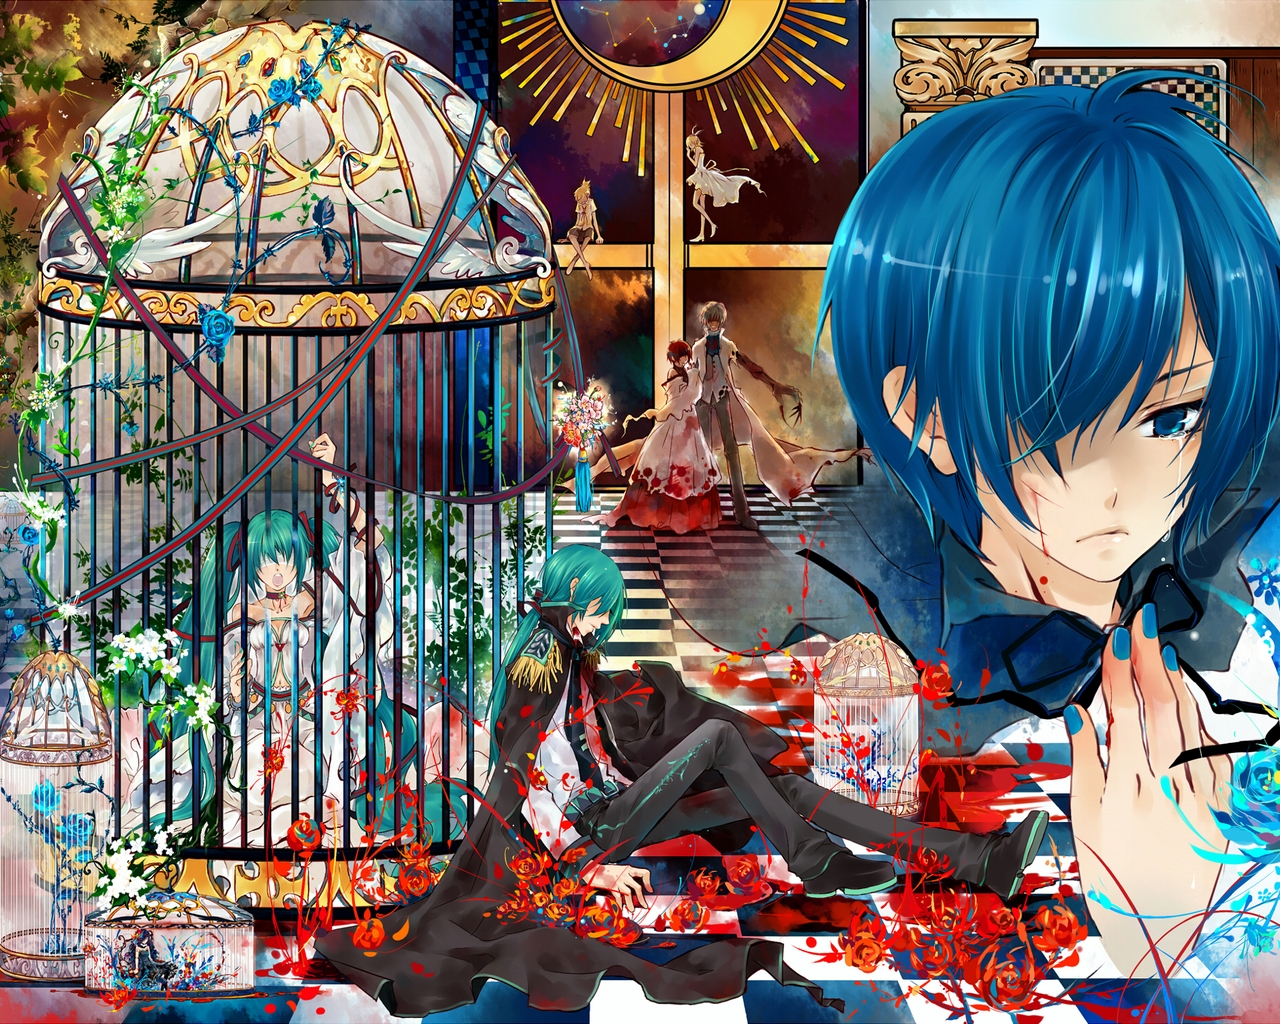 Vocaloid Kaito for 1280 x 1024 resolution